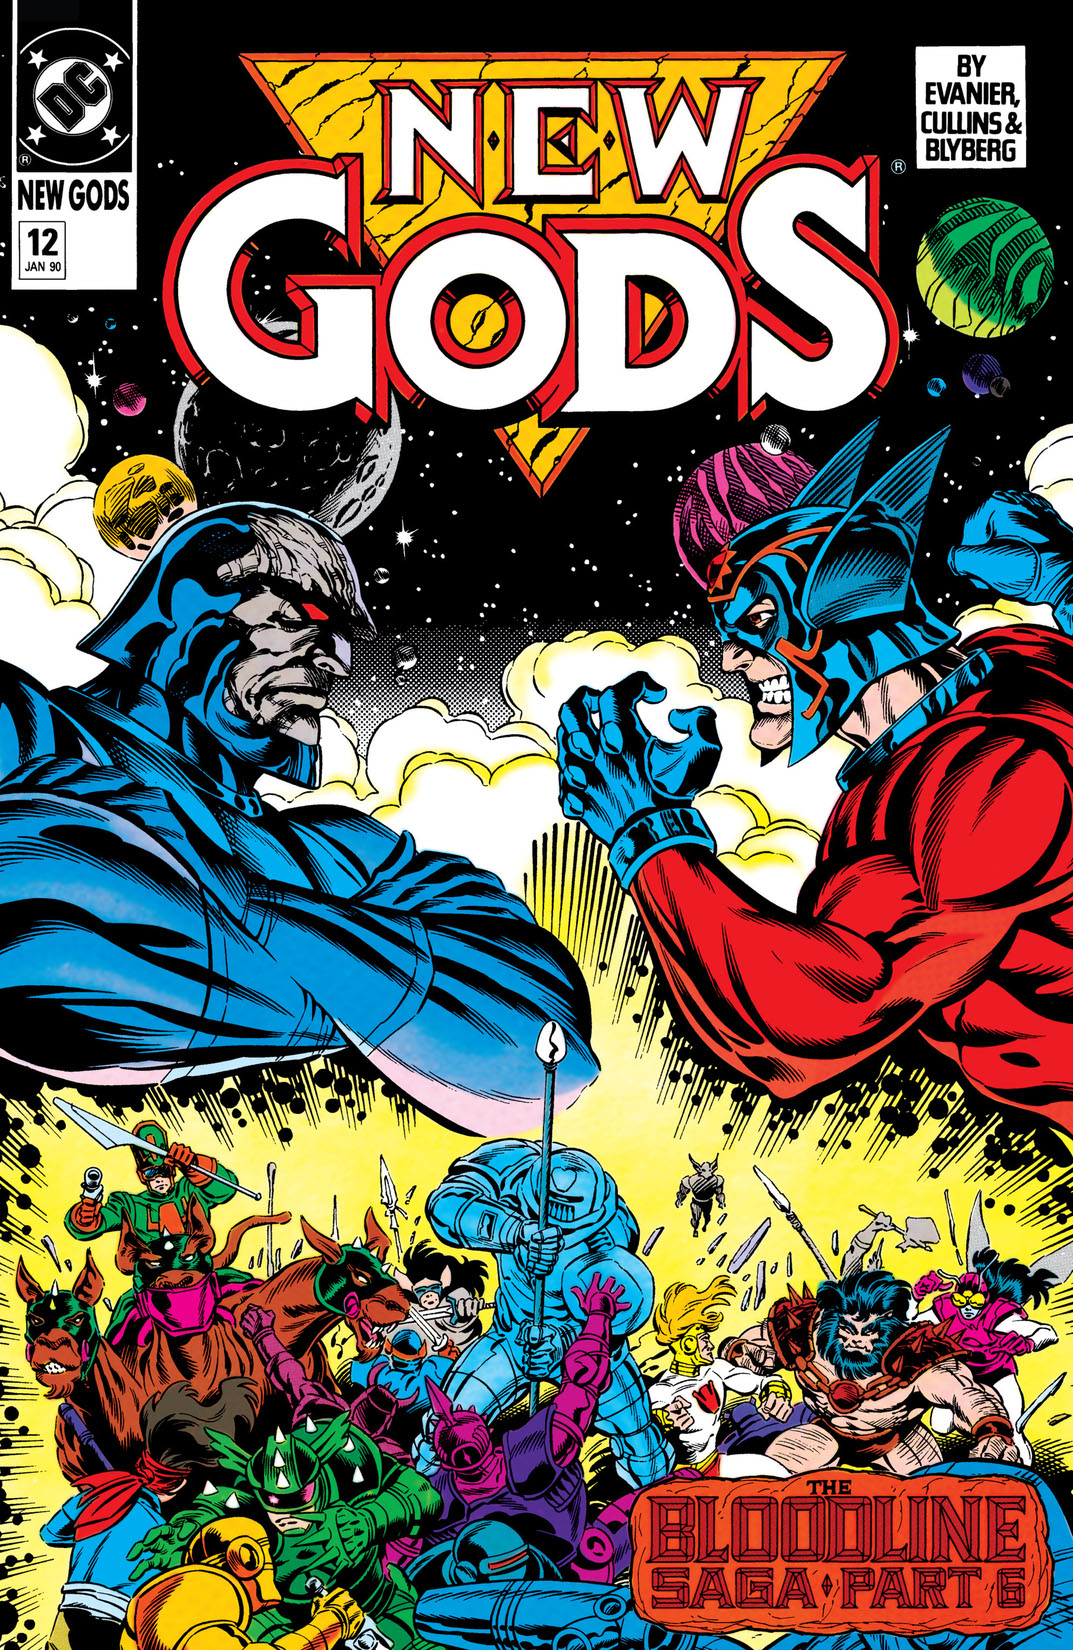 New Gods (1989-) #12 preview images